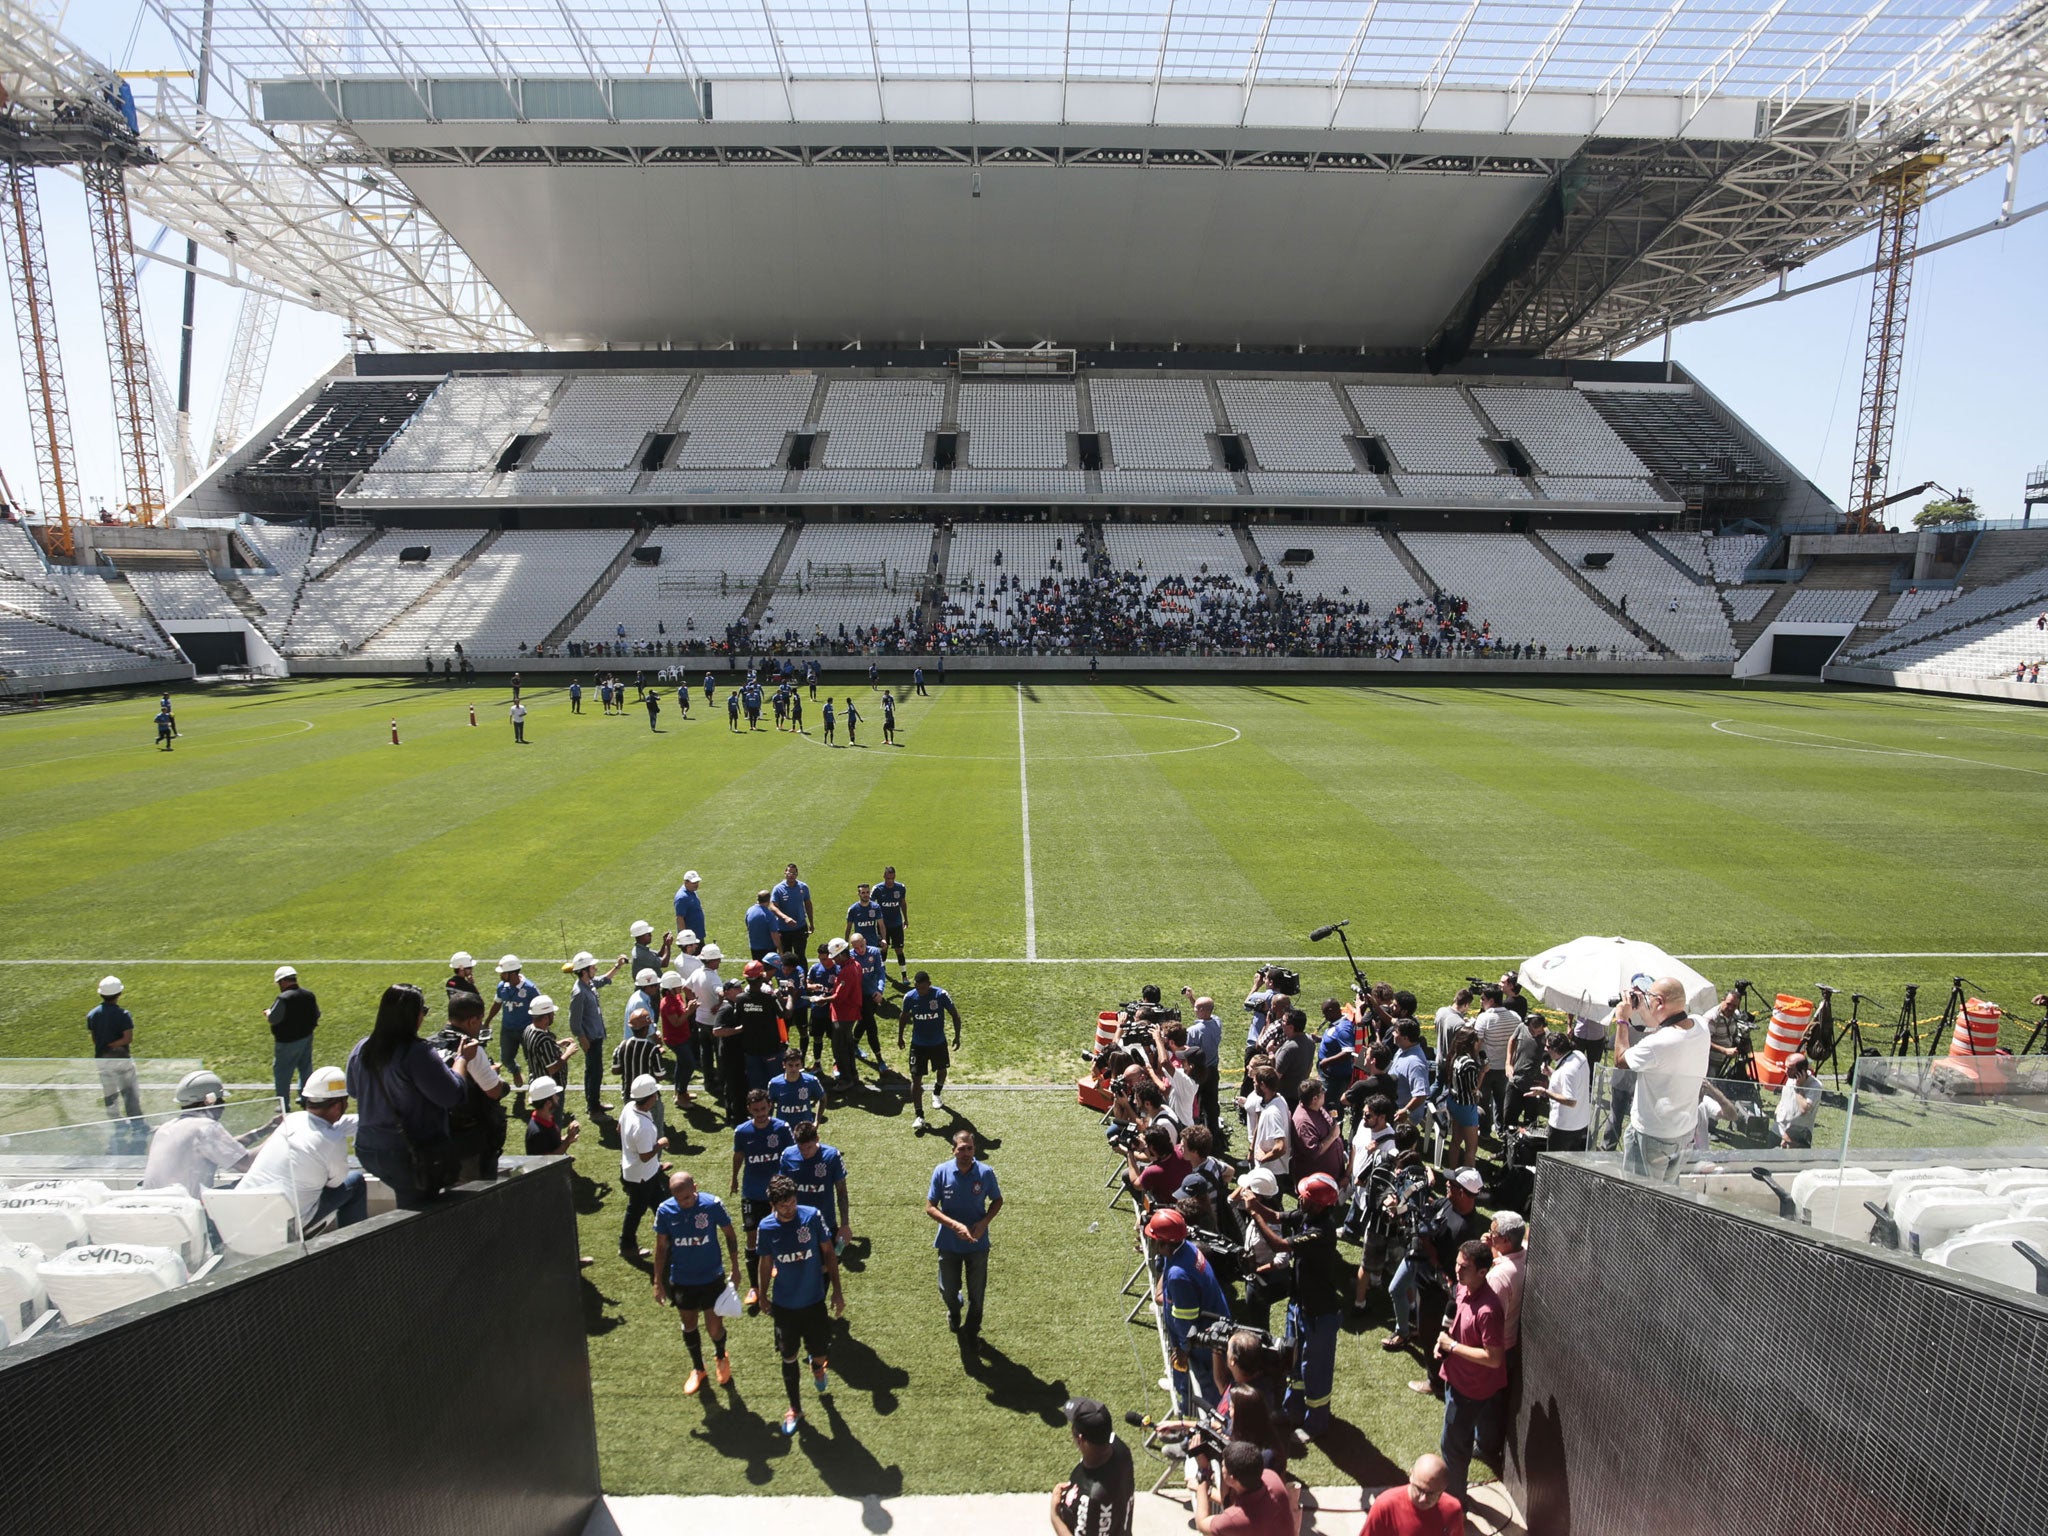 Corinthians Arena, where Brazil’s opening World Cup game will take place, is still a work in progress and three people have died since construction of the stadium began